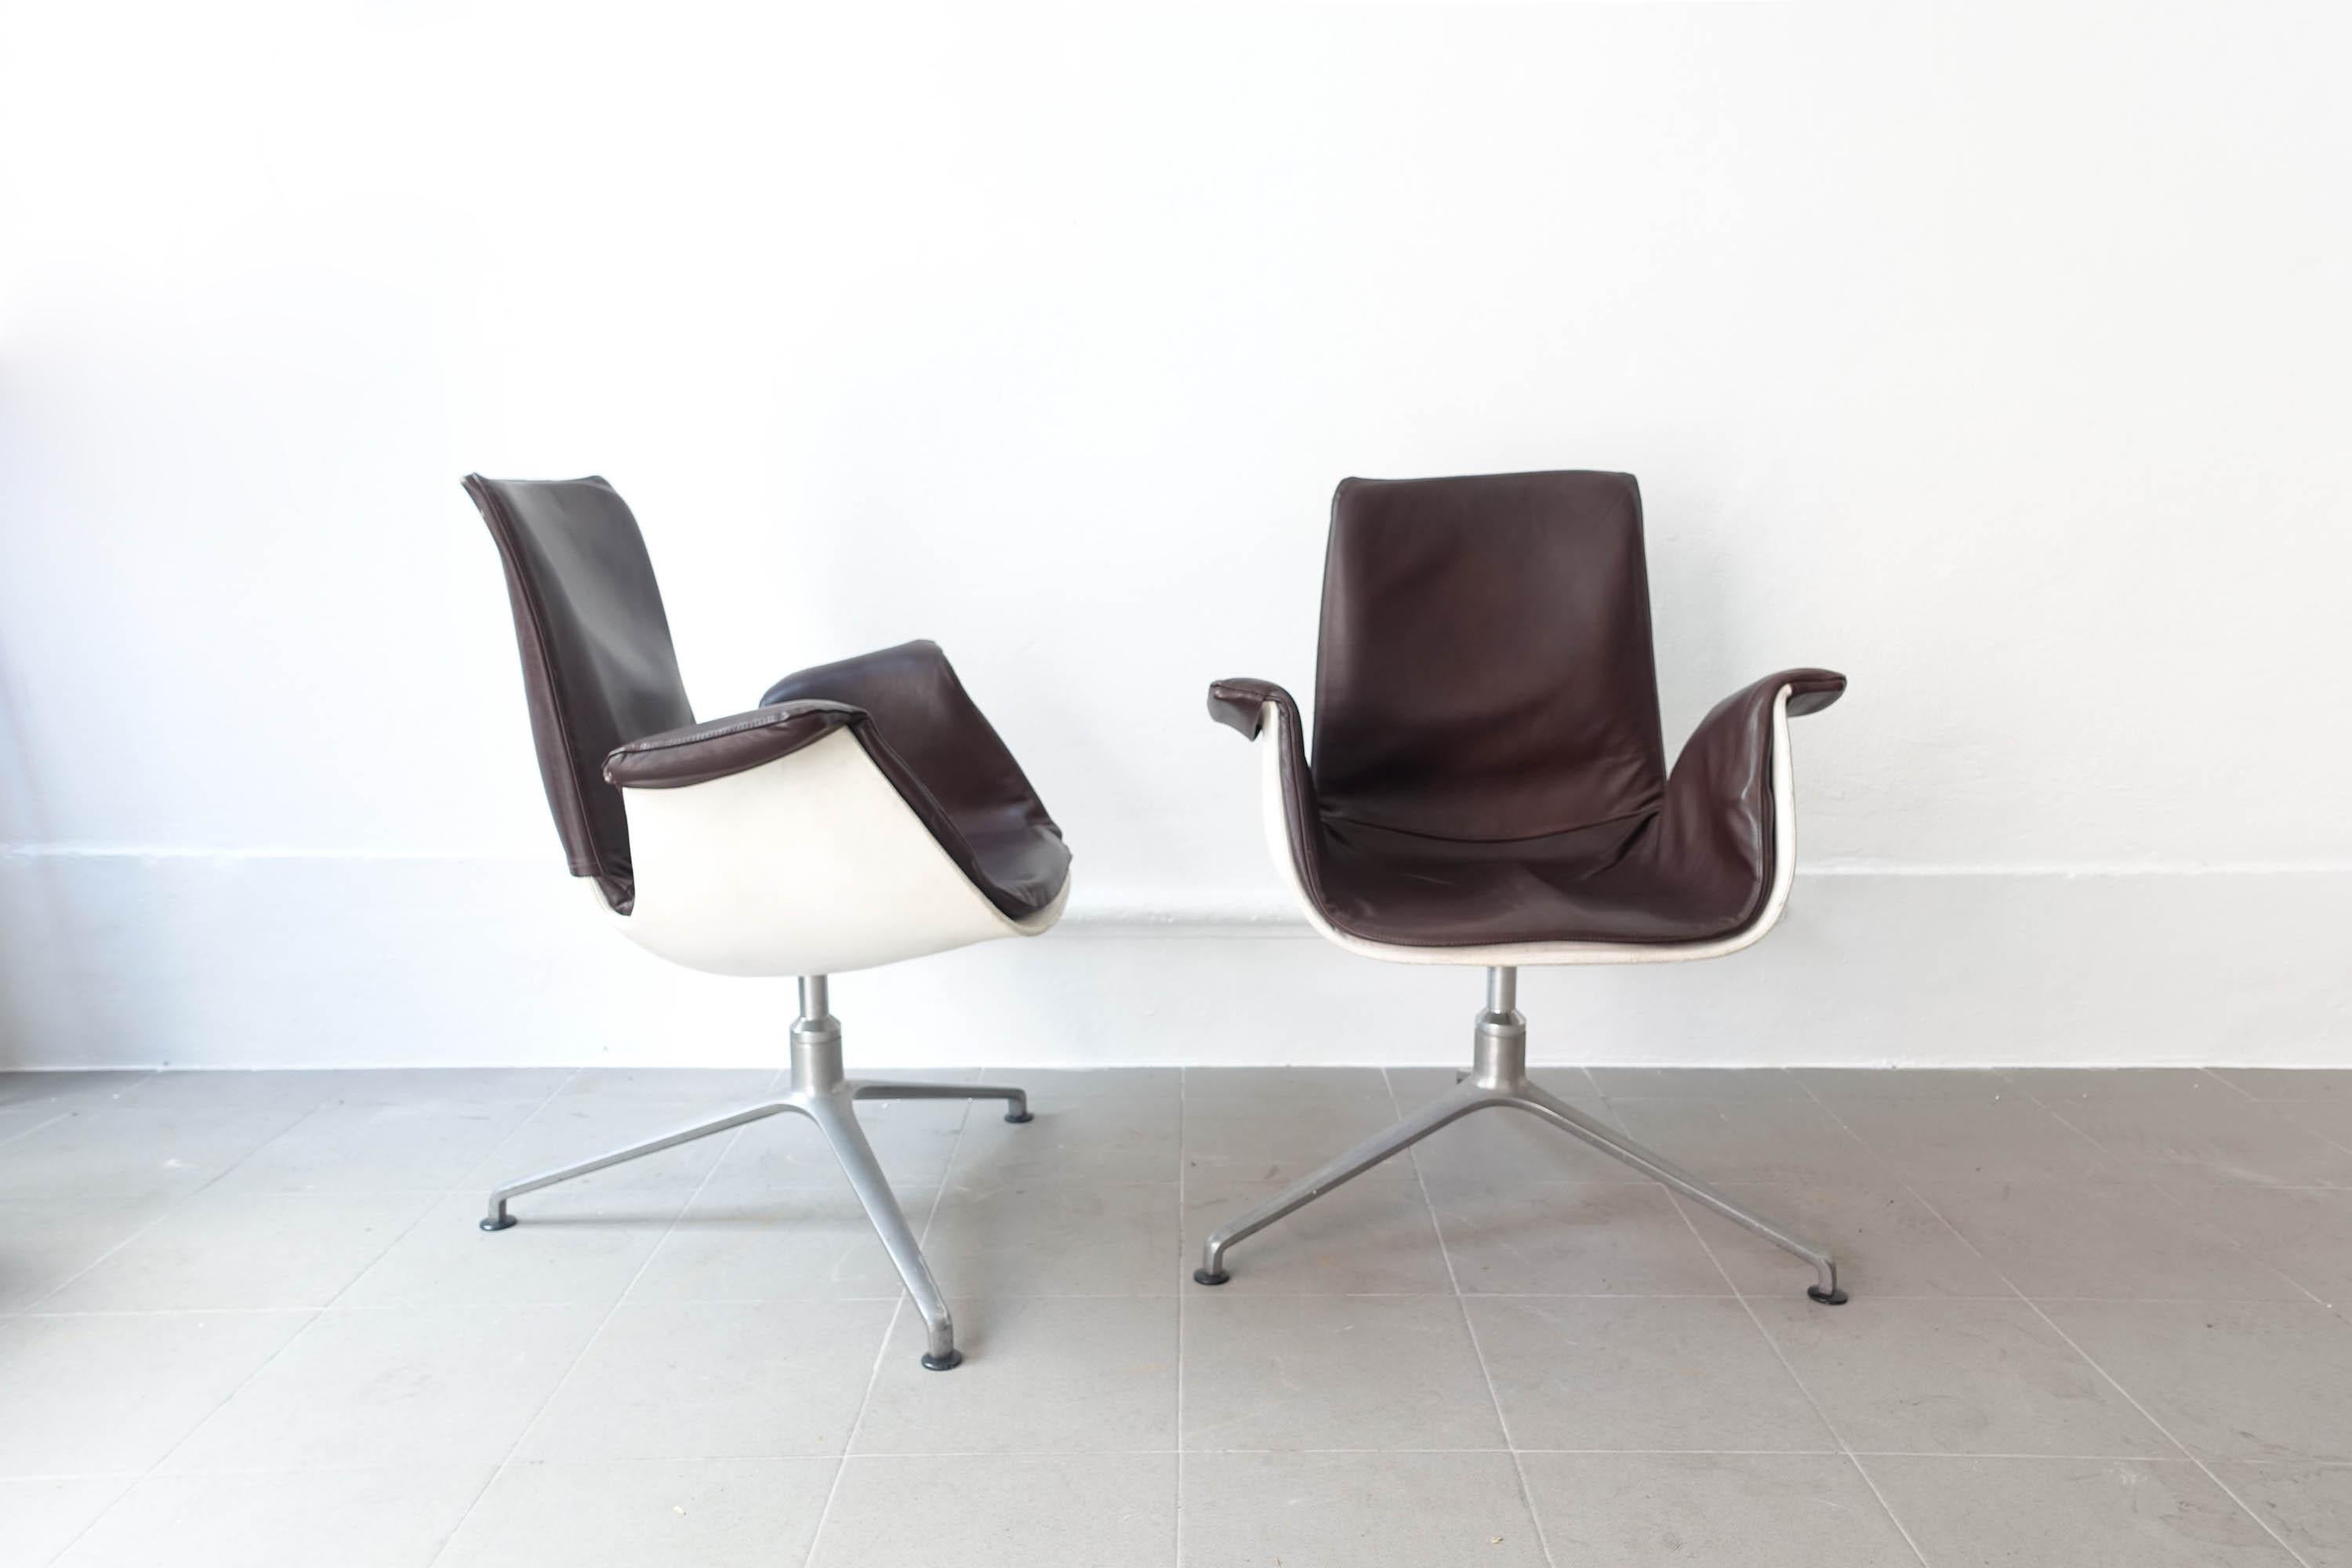 This pair of FK6727 tulip chair was designed by Preben Fabricius & Jørgen Kastholm for Kill International, in Germany, during the 1960's. In 1964 this was a revolutionary design of a swivel armchair the chair received the Federal Prize for Good